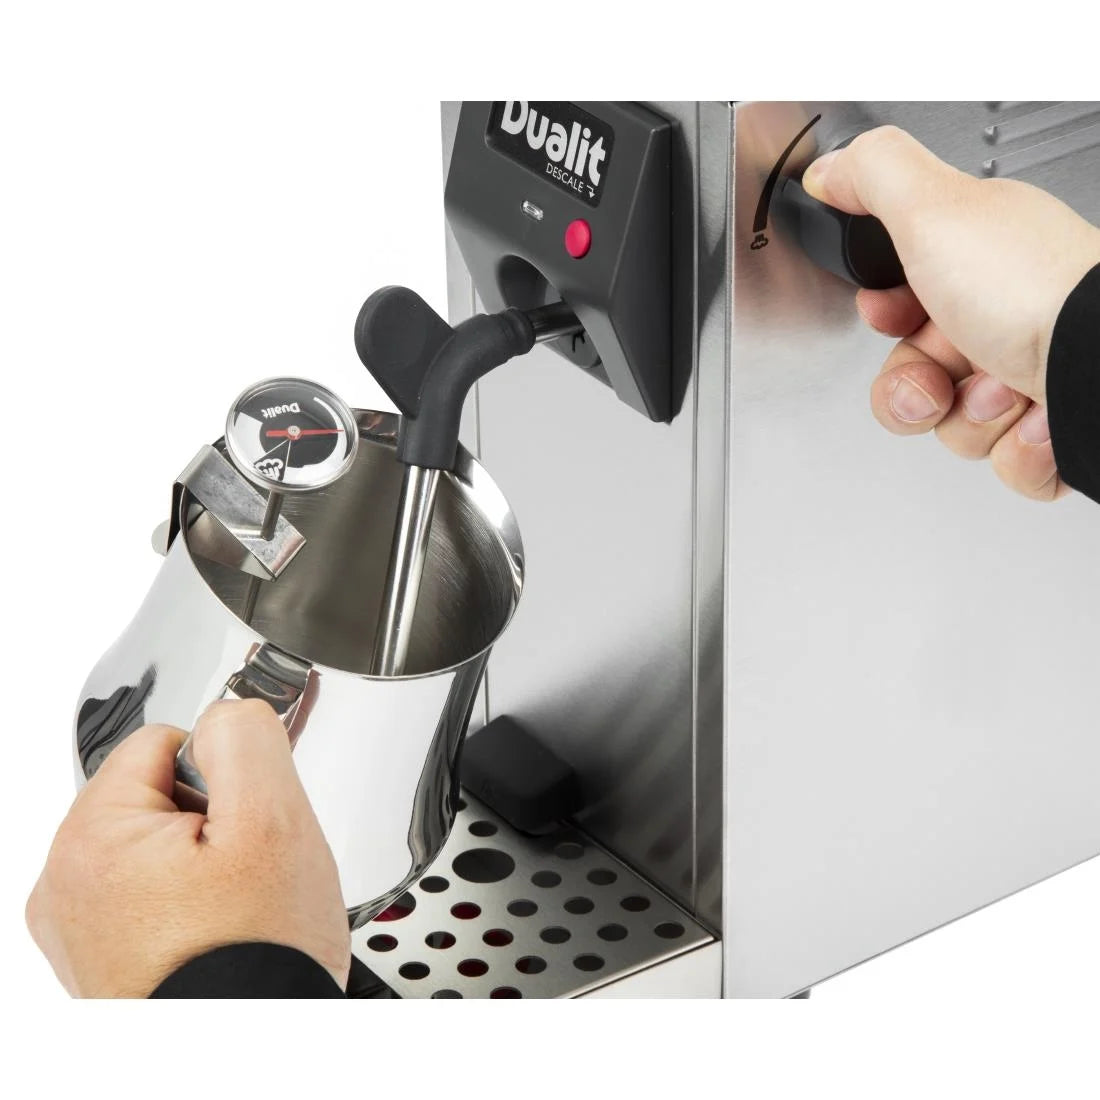 Dualit Cino Milk Frother.Product Ref:00565.MODEL:CN452.🚚 3-5 Days Delivery